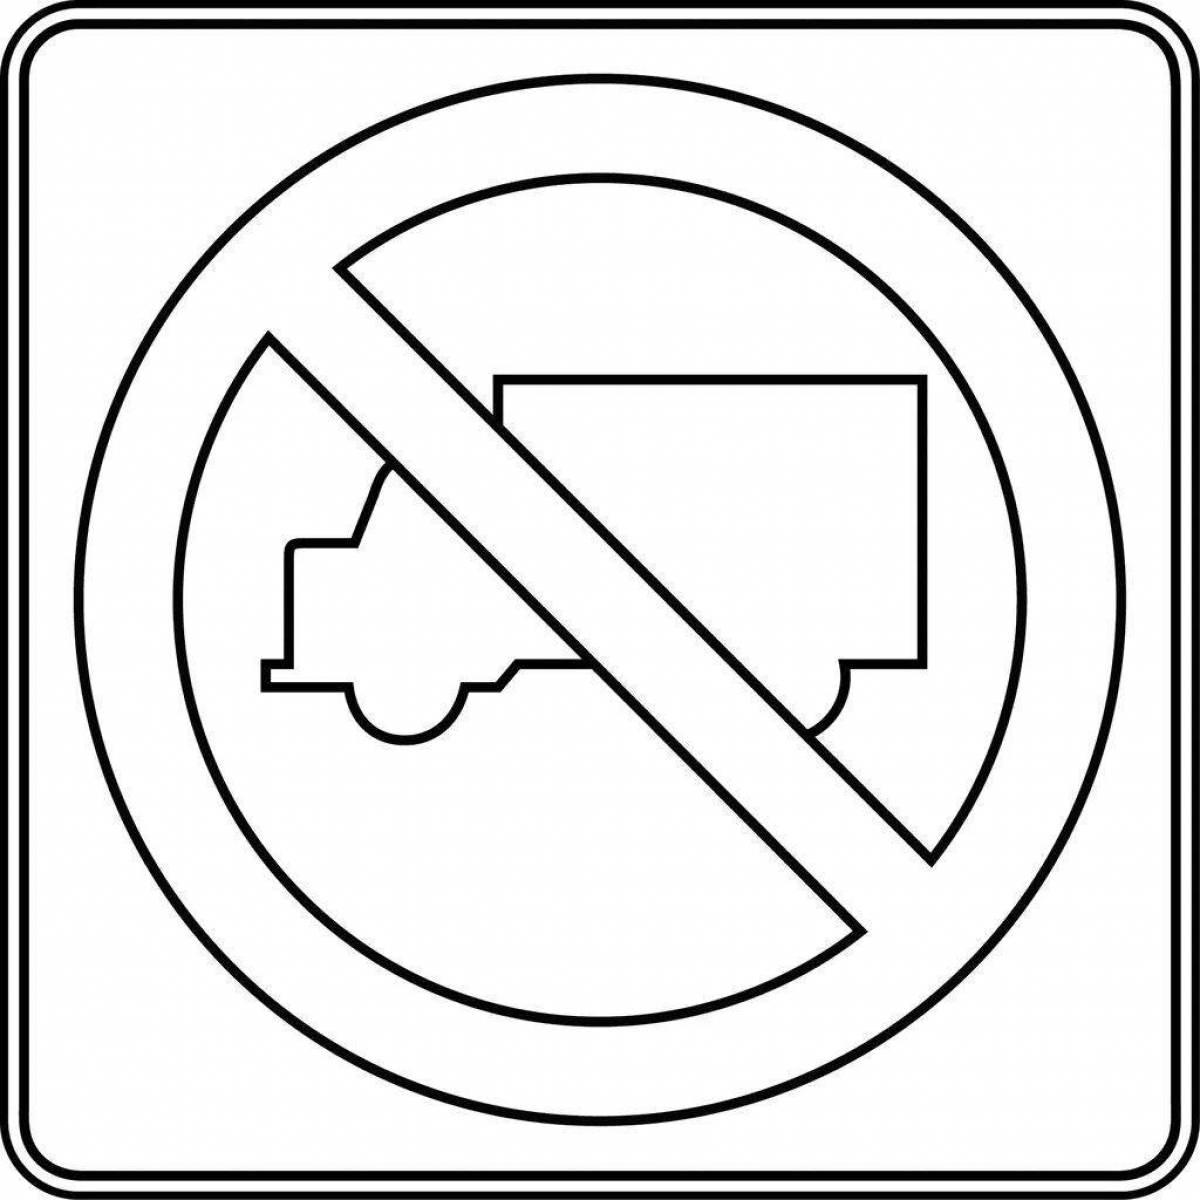 Coloring page with bright traffic sign